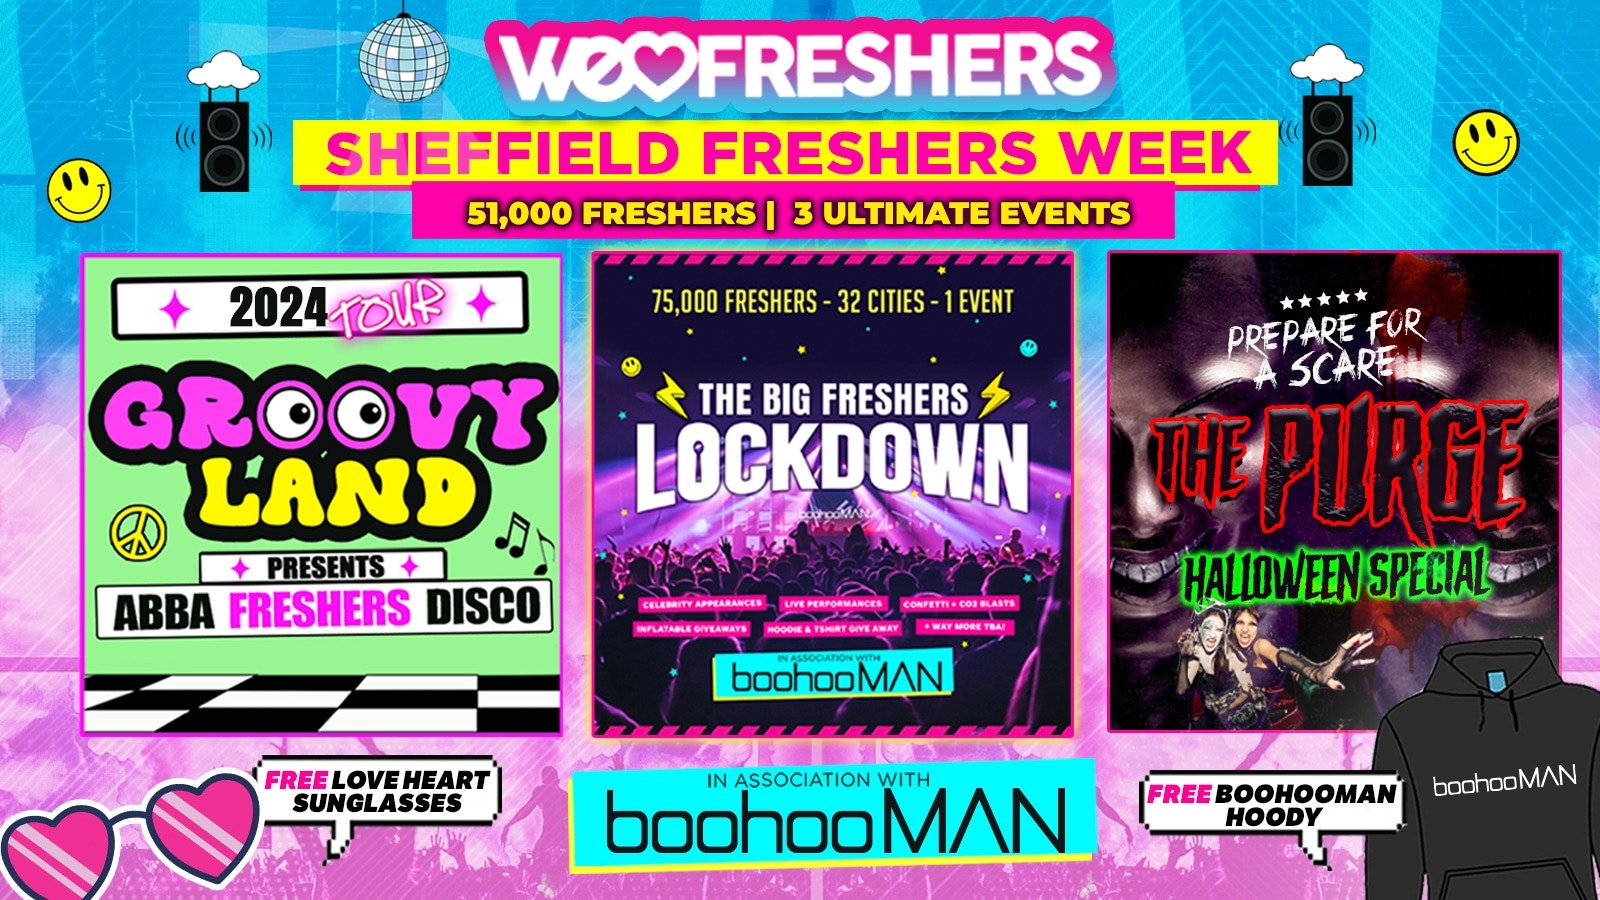 WE LOVE SHEFFIELD FRESHERS 2024 in association with boohooMAN – 3 EVENTS❗